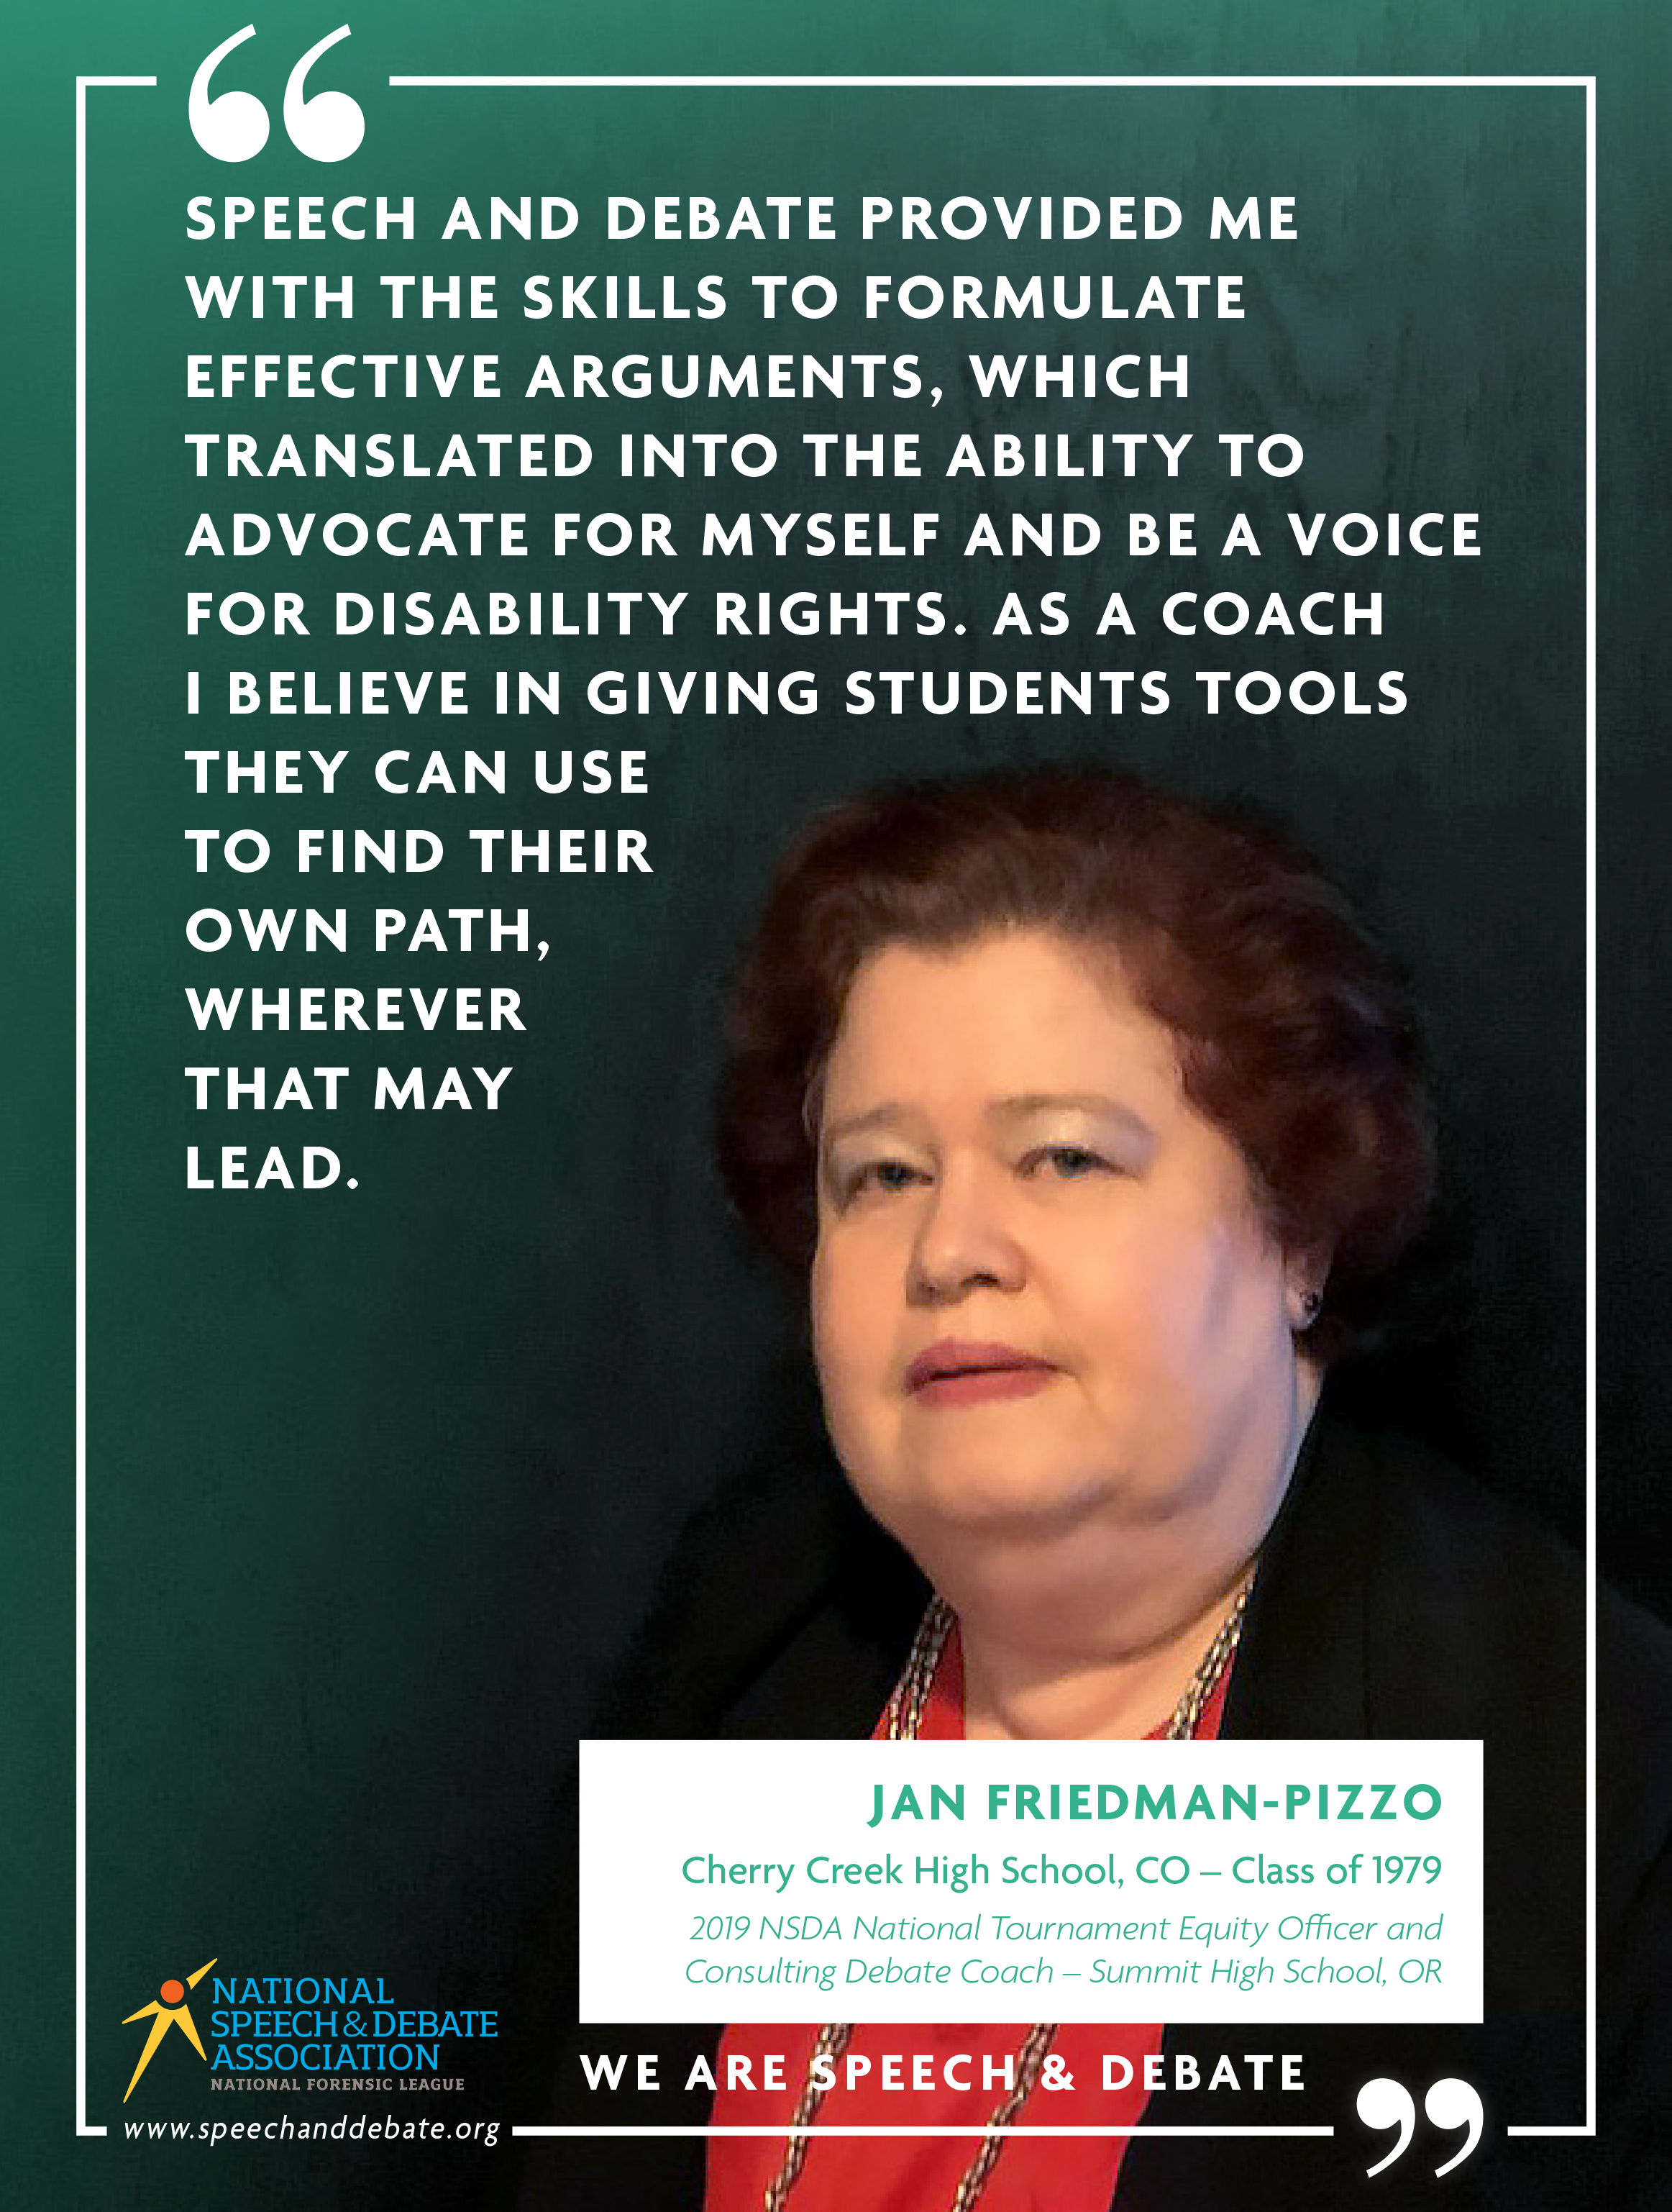 "SPEECH AND DEBATE PROVIDED ME WITH THE SKILLS TO FORMULATE EFFECTIVE ARGUMENTS, WHICH TRANSLATED INTO THE ABILITY TO ADVOCATE FOR MYSELF AND BE A VOICE FOR DISABILITY RIGHTS. AS A COACH I BELIEVE IN GIVING STUDENTS TOOLS THEY CAN USE TO FIND THEIR OWN PATH, WHEREVER THAT MAY LEAD." - Jan Friedman-Pizzo